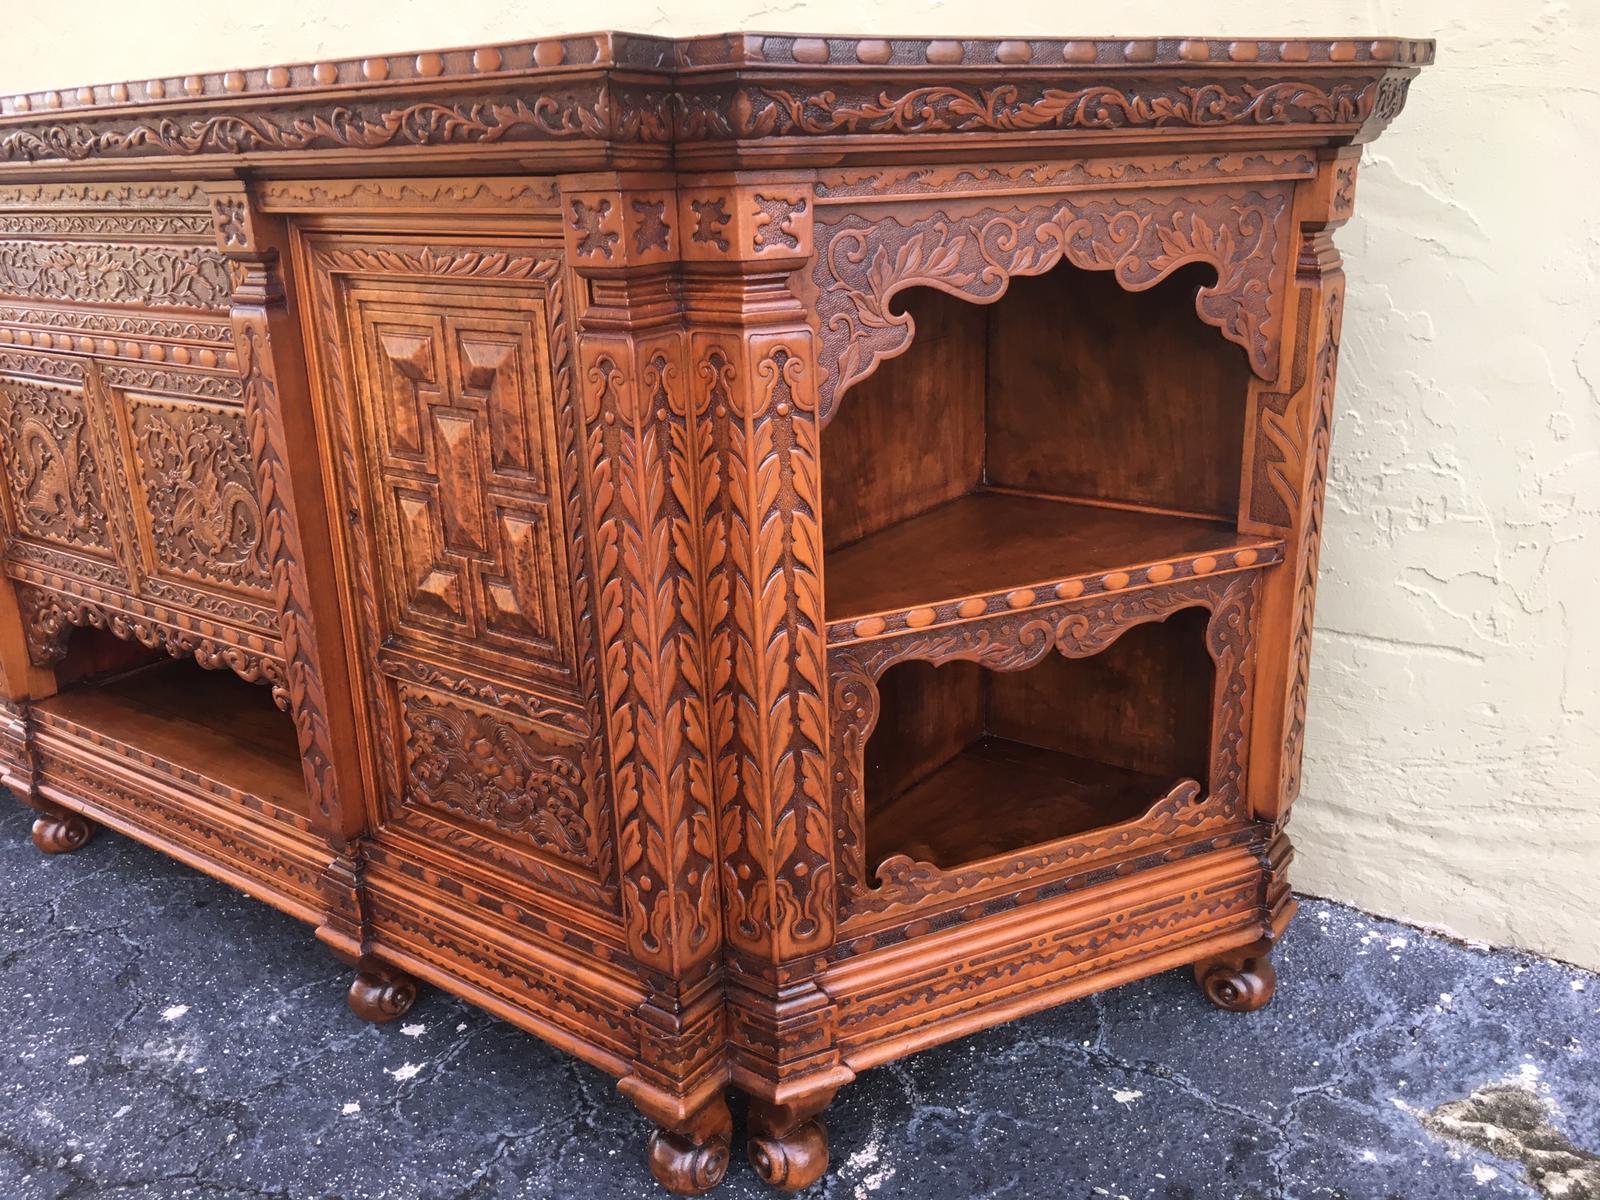 Fruitwood Antique Japanese Hand Carved Elmwood Cabinet, Sideboard, Meiji, 20th Century For Sale